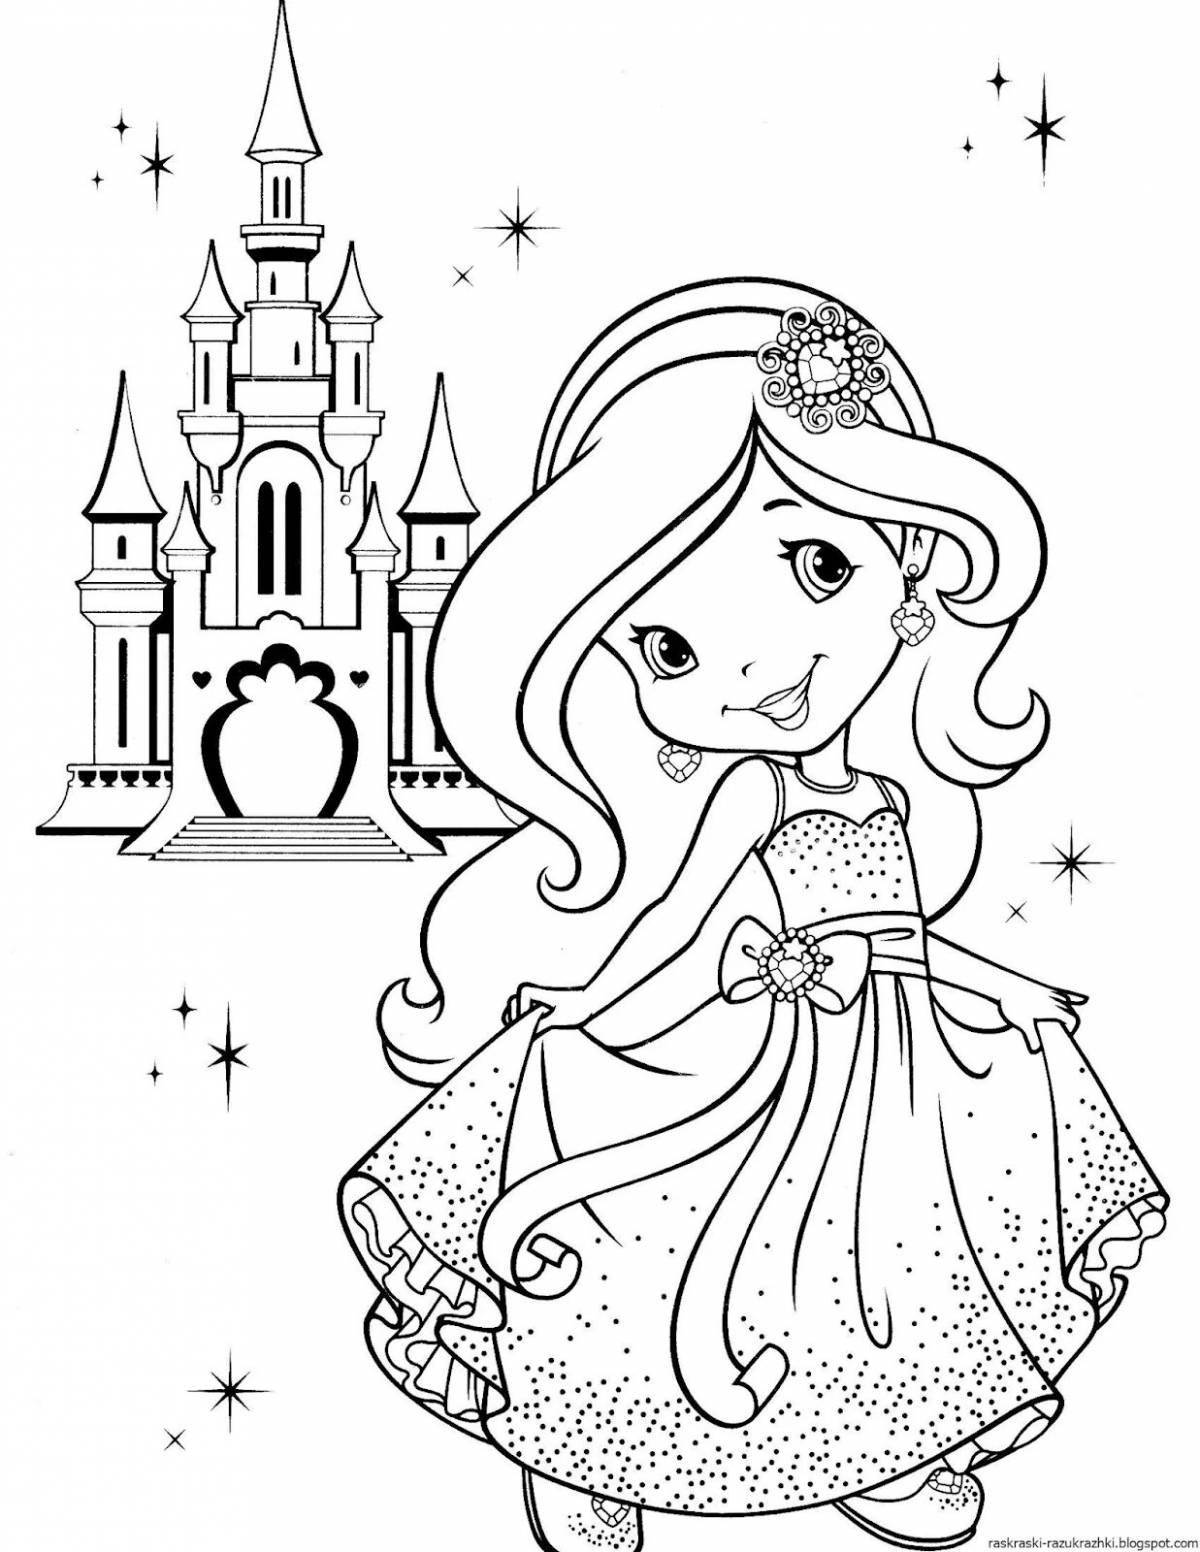 Adorable princess coloring book for kids